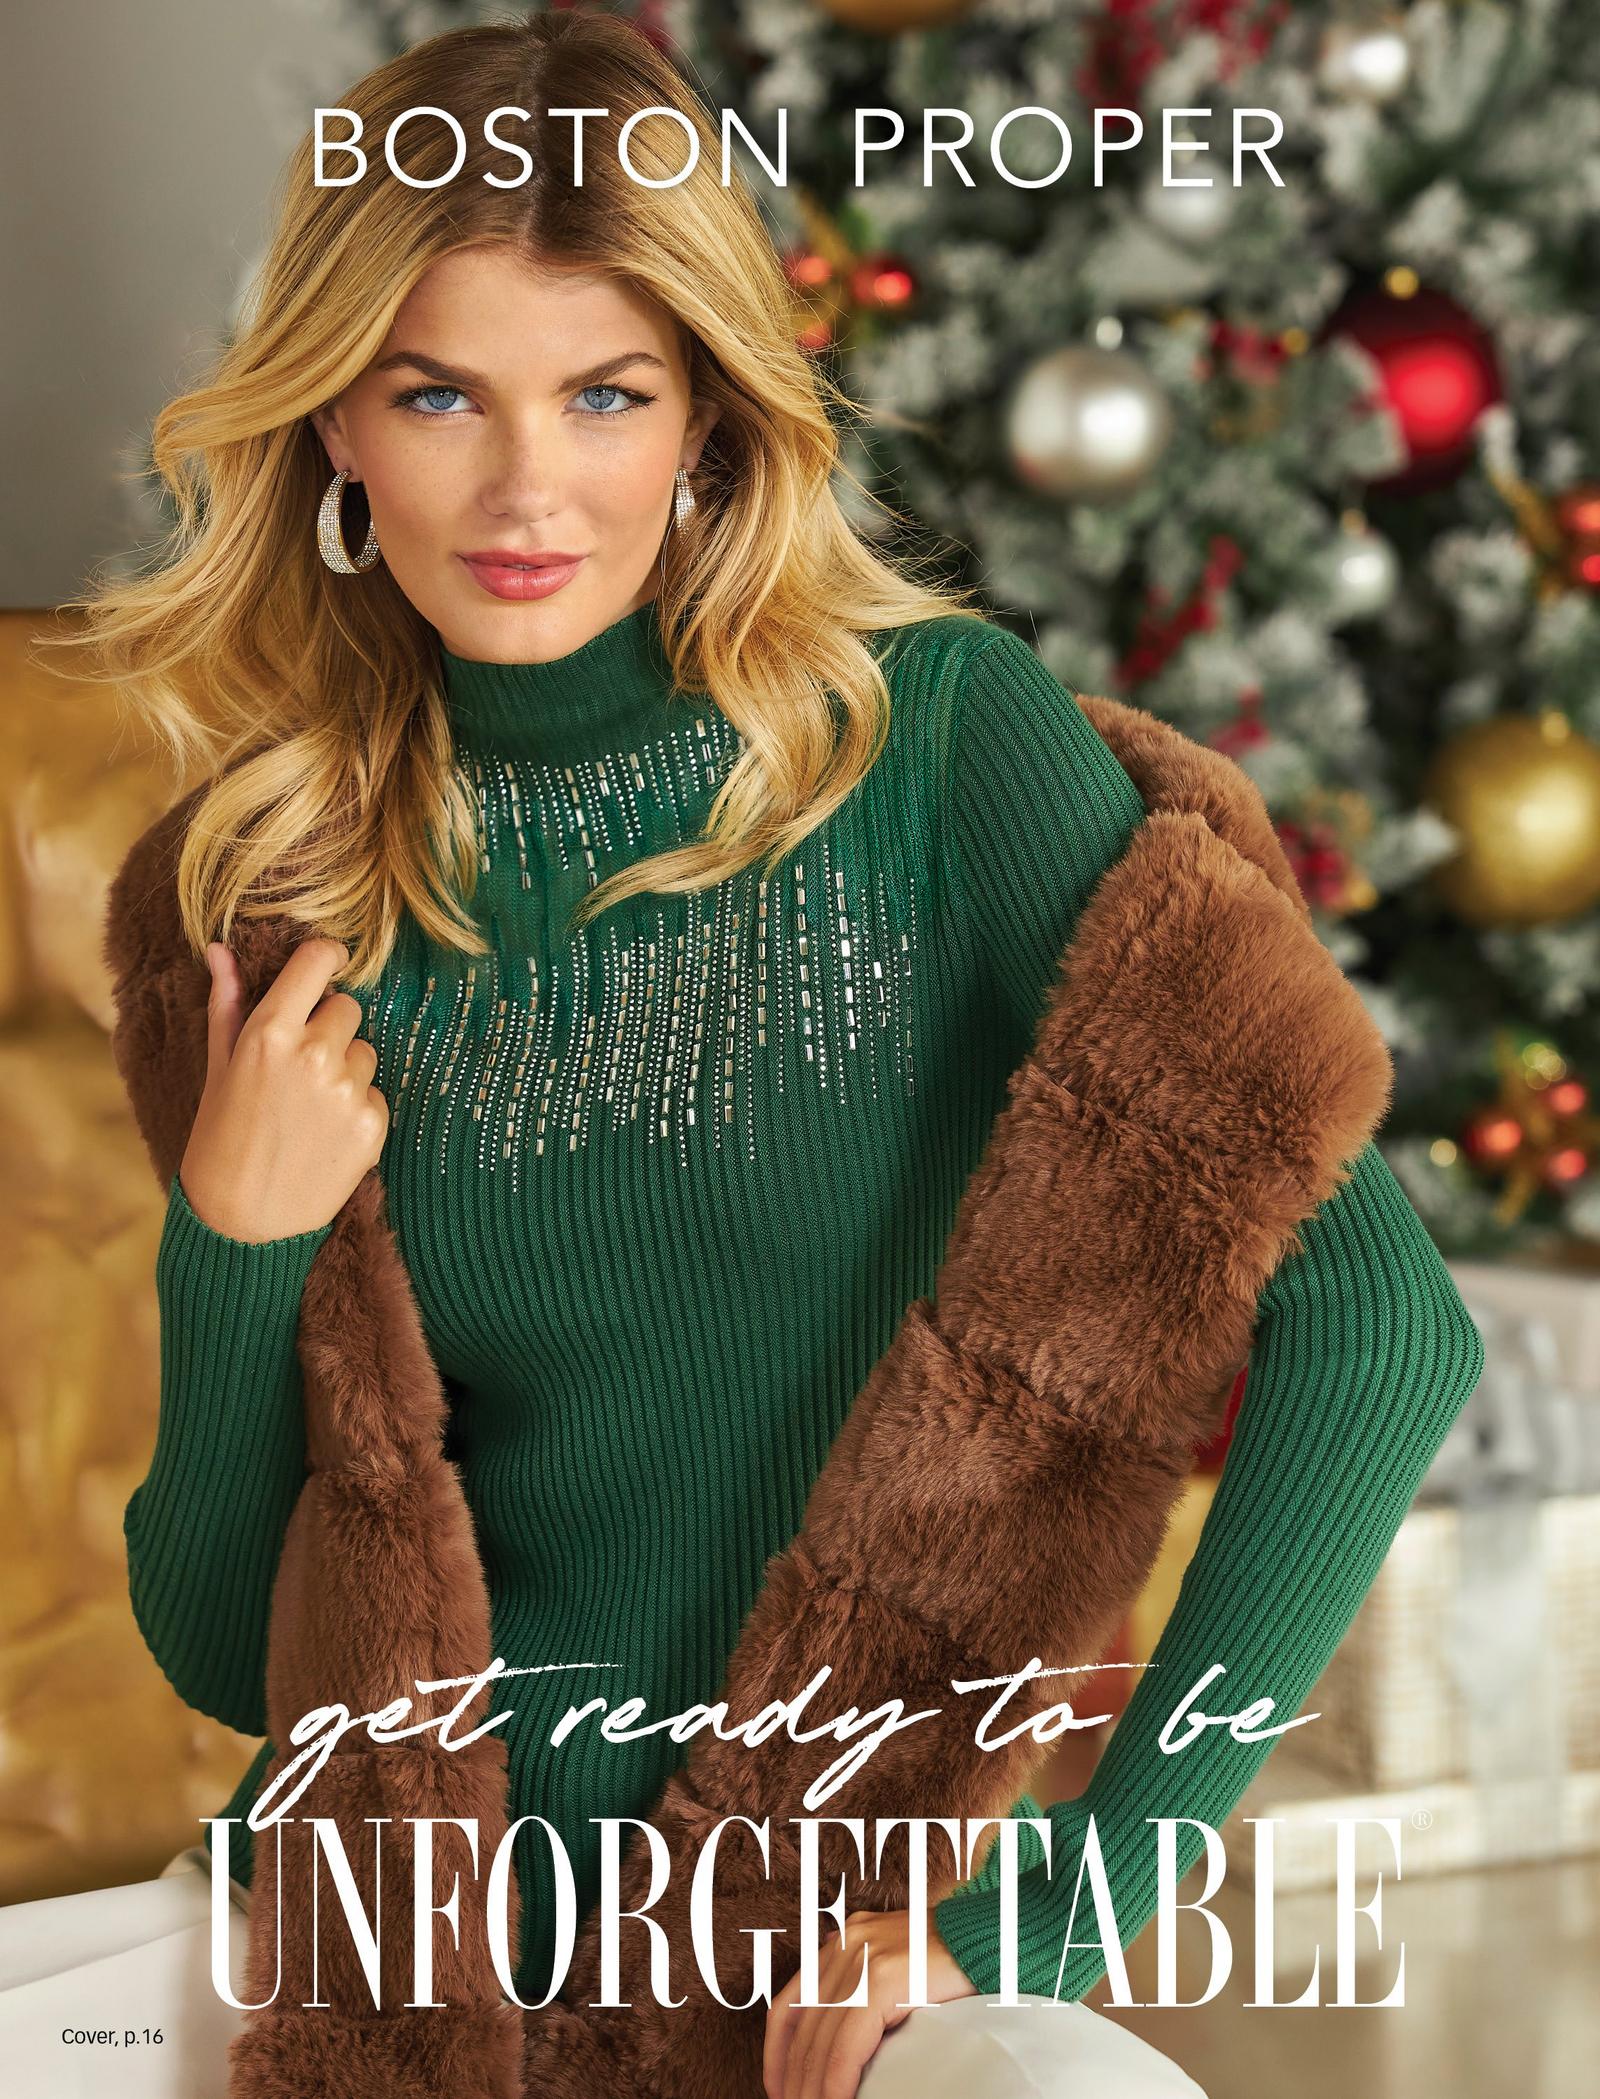 model wearing a green embellished turtleneck sweater, brown faux-fur scarf, and white pants.